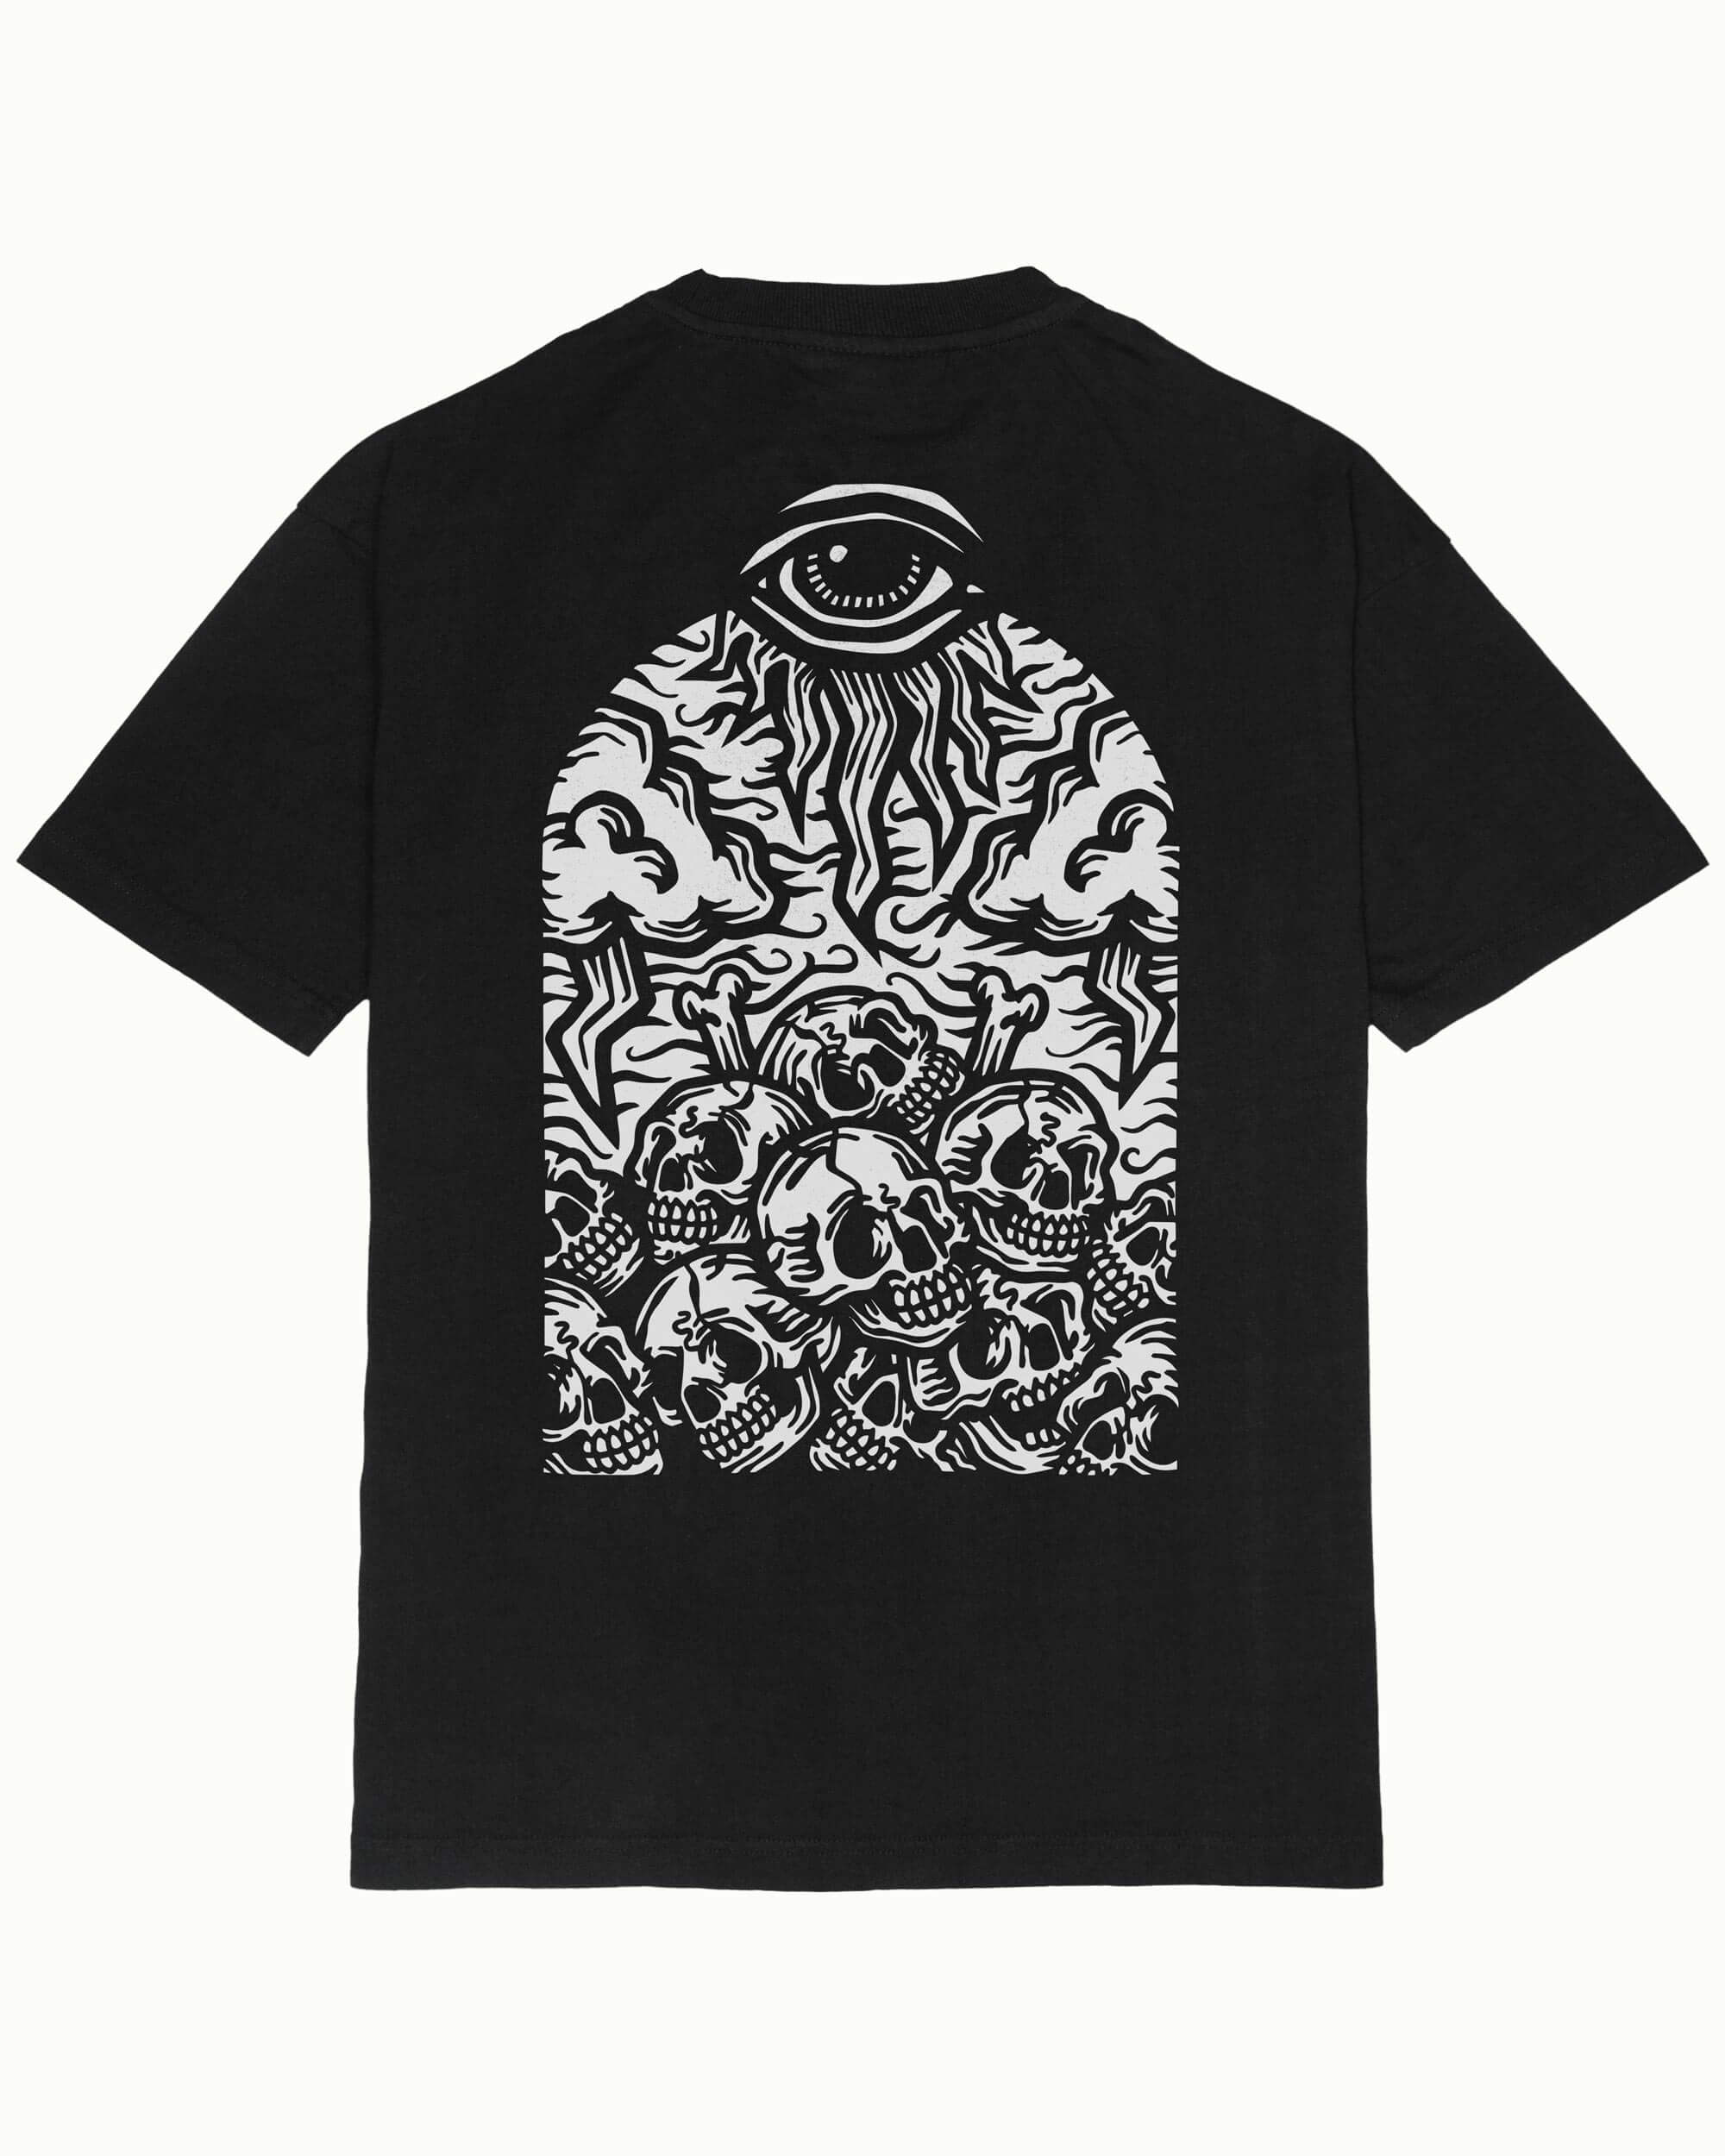 Gates of Hell Tee